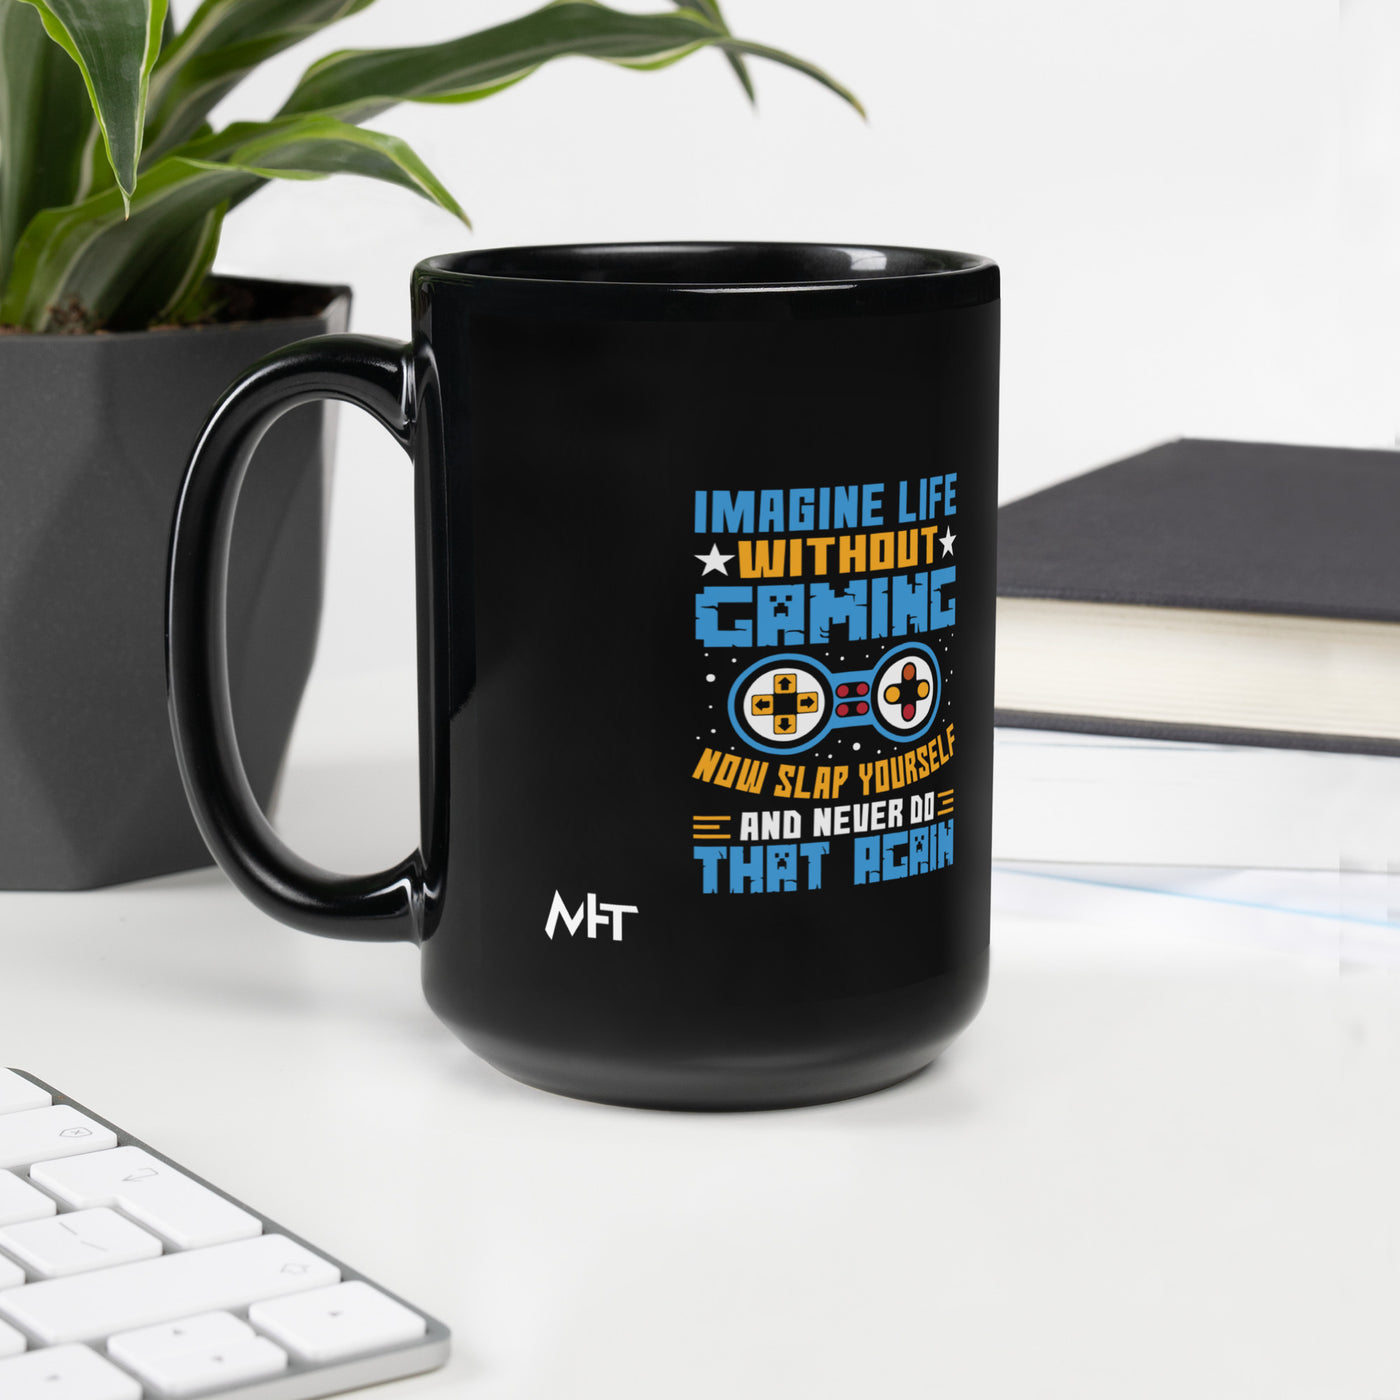 Imagine Life Without Gaming Now Slap Yourself and Never Do that again Rima 15 - Black Glossy Mug